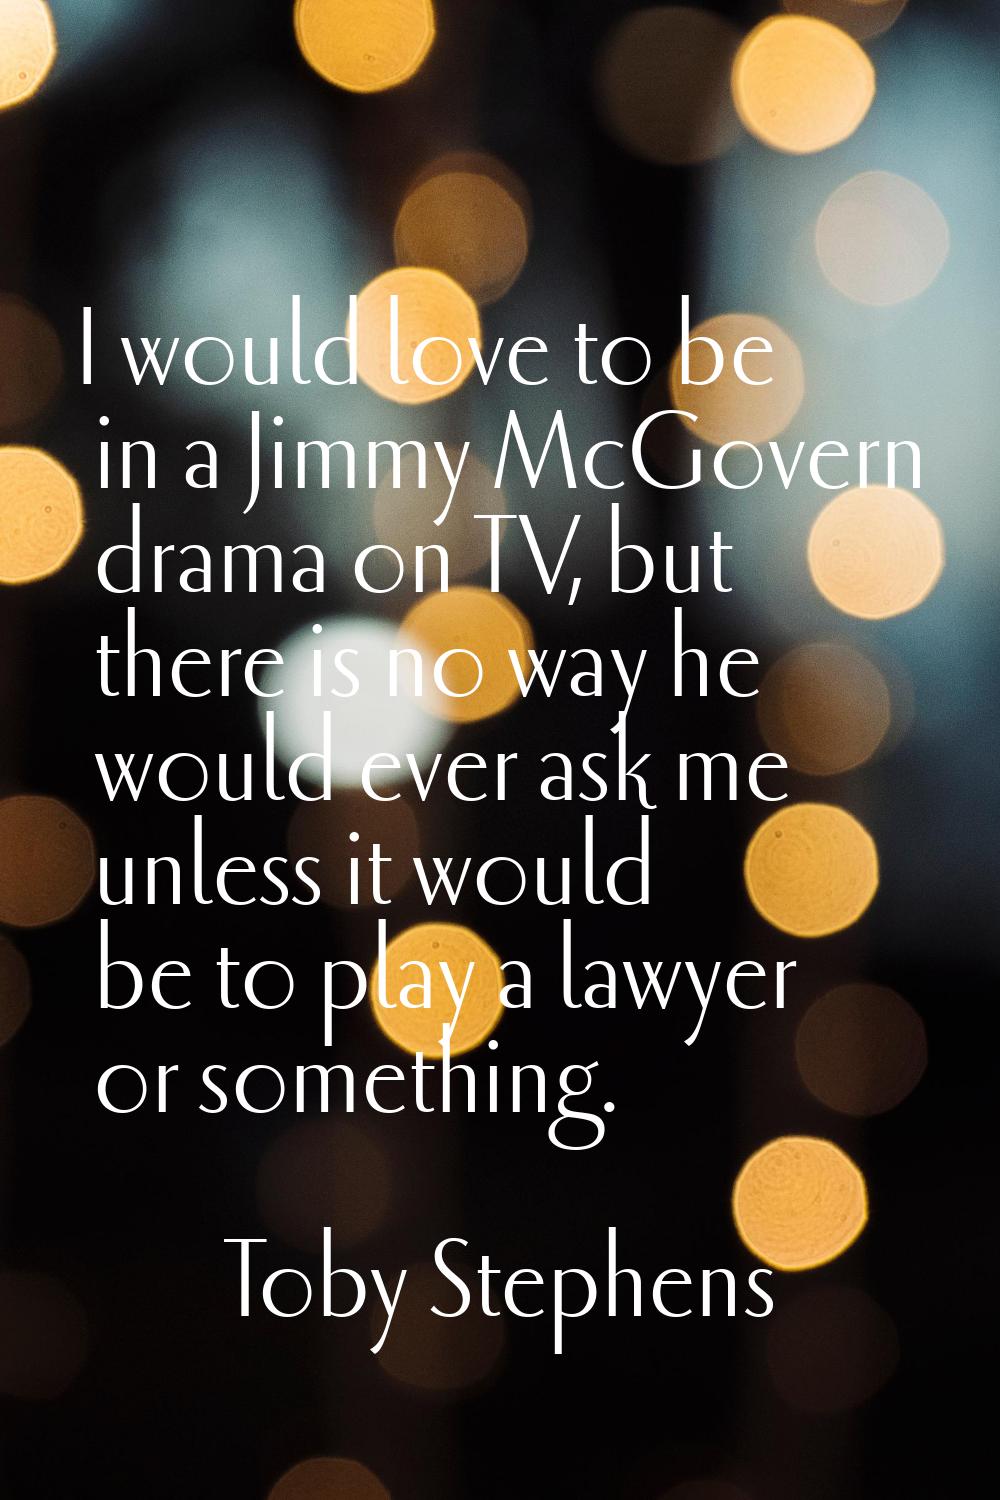 I would love to be in a Jimmy McGovern drama on TV, but there is no way he would ever ask me unless